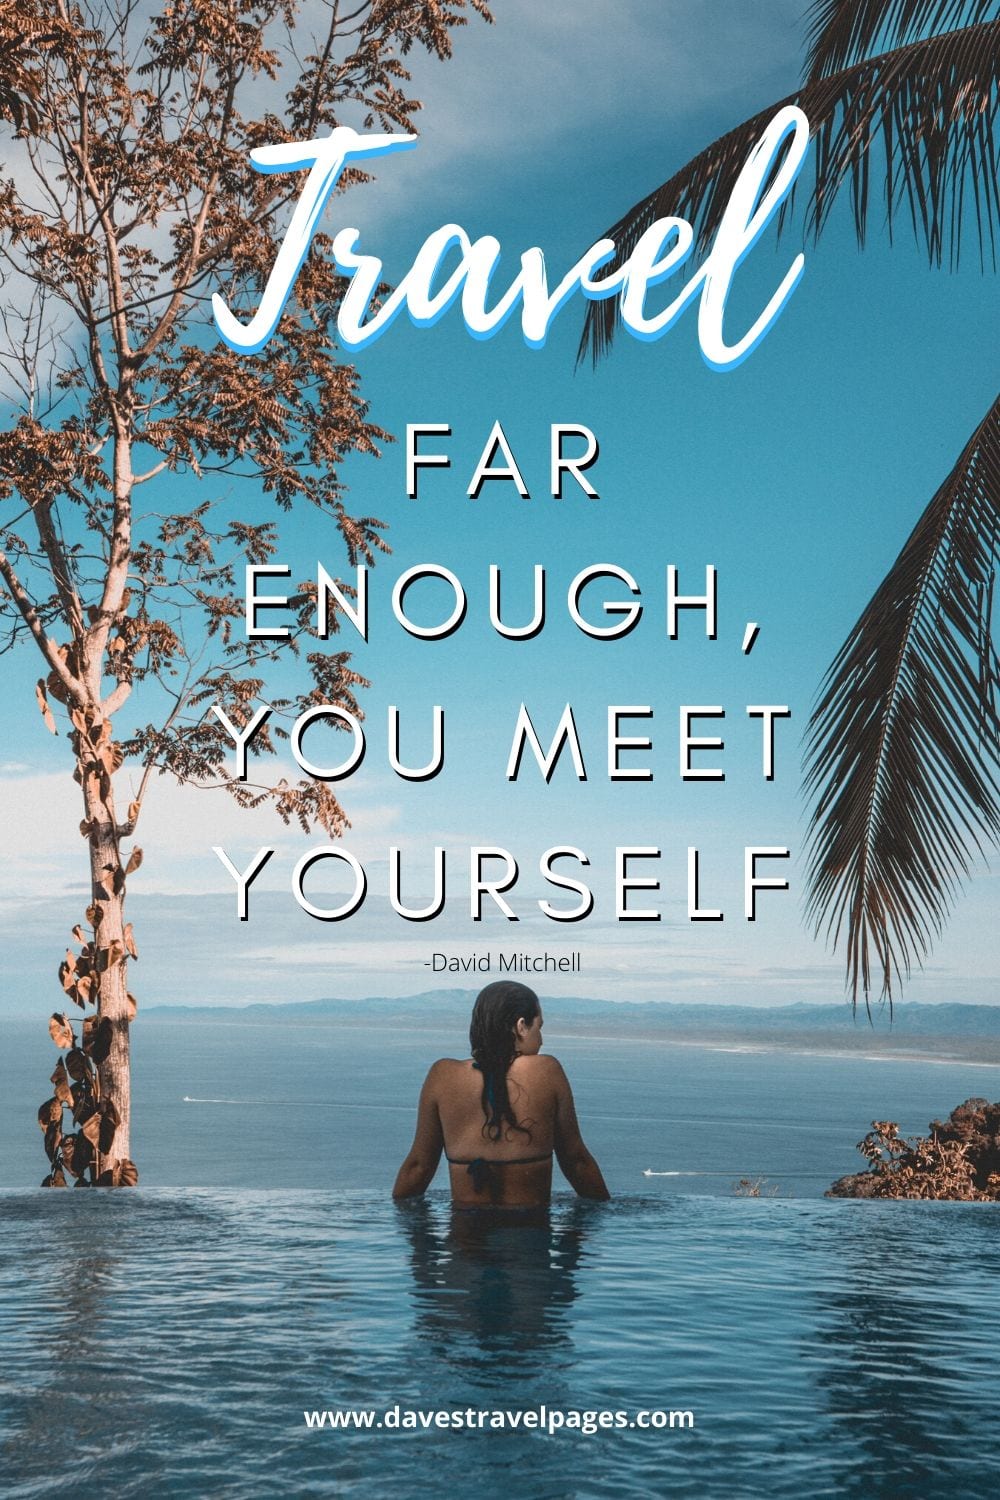 Quotes About Traveling 50 Amazing Travel Captions For Inspiration!